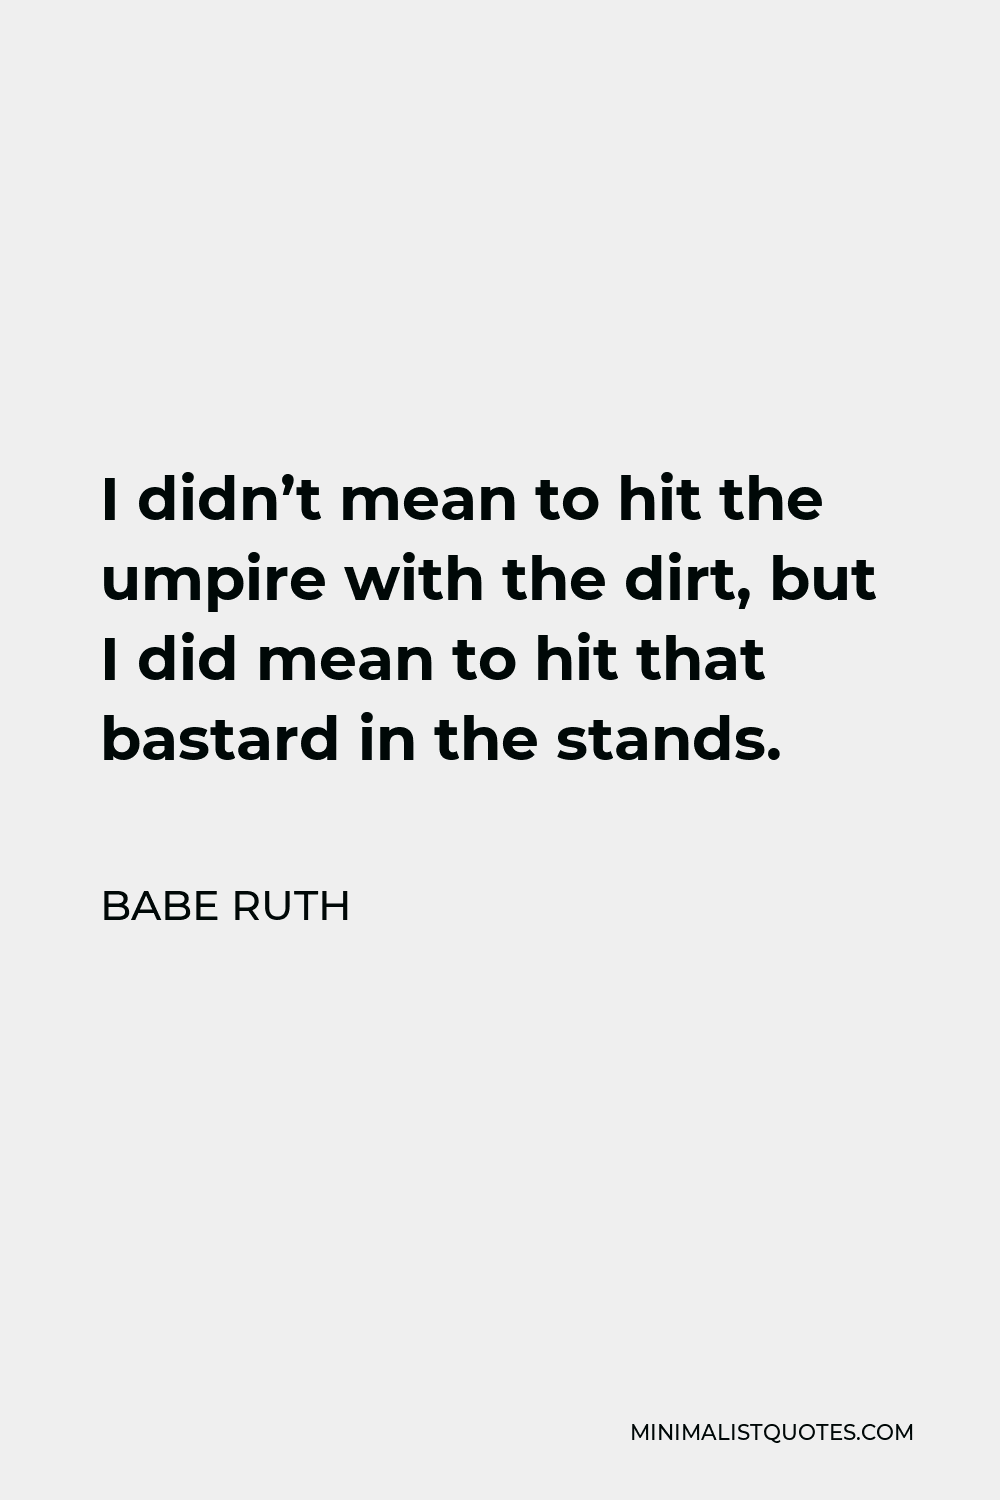 Babe Ruth Quote - I didn’t mean to hit the umpire with the dirt, but I did mean to hit that bastard in the stands.